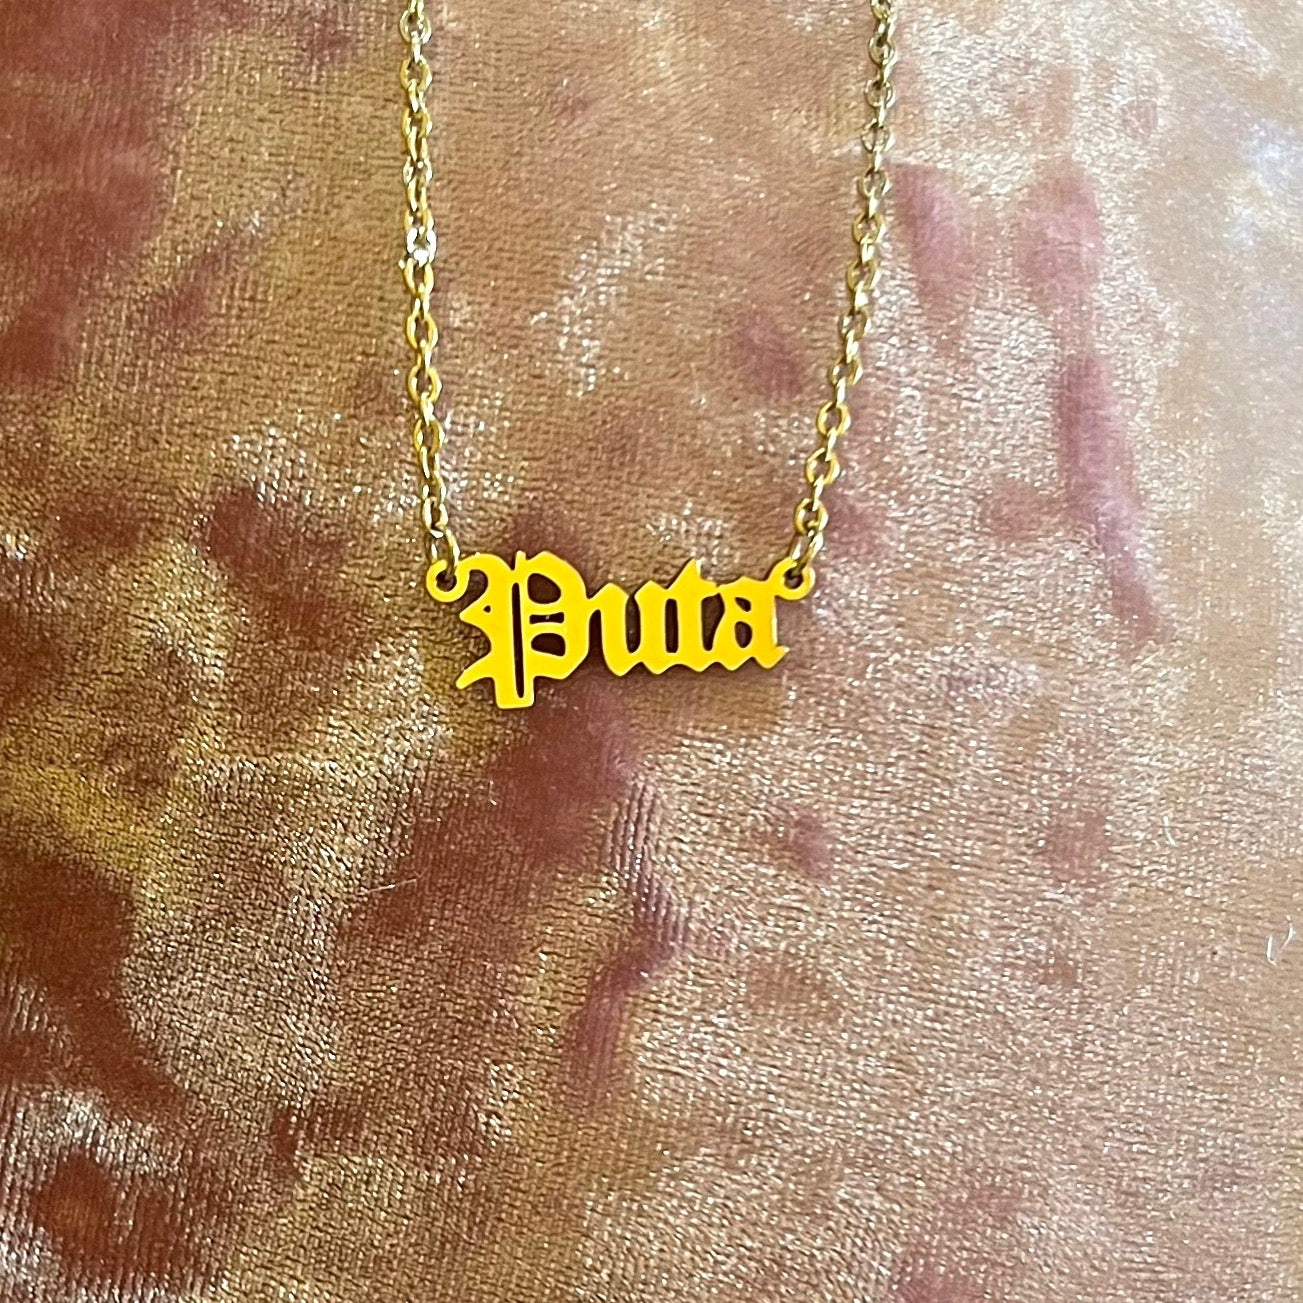 Puta Gold Plated Nameplate Necklace